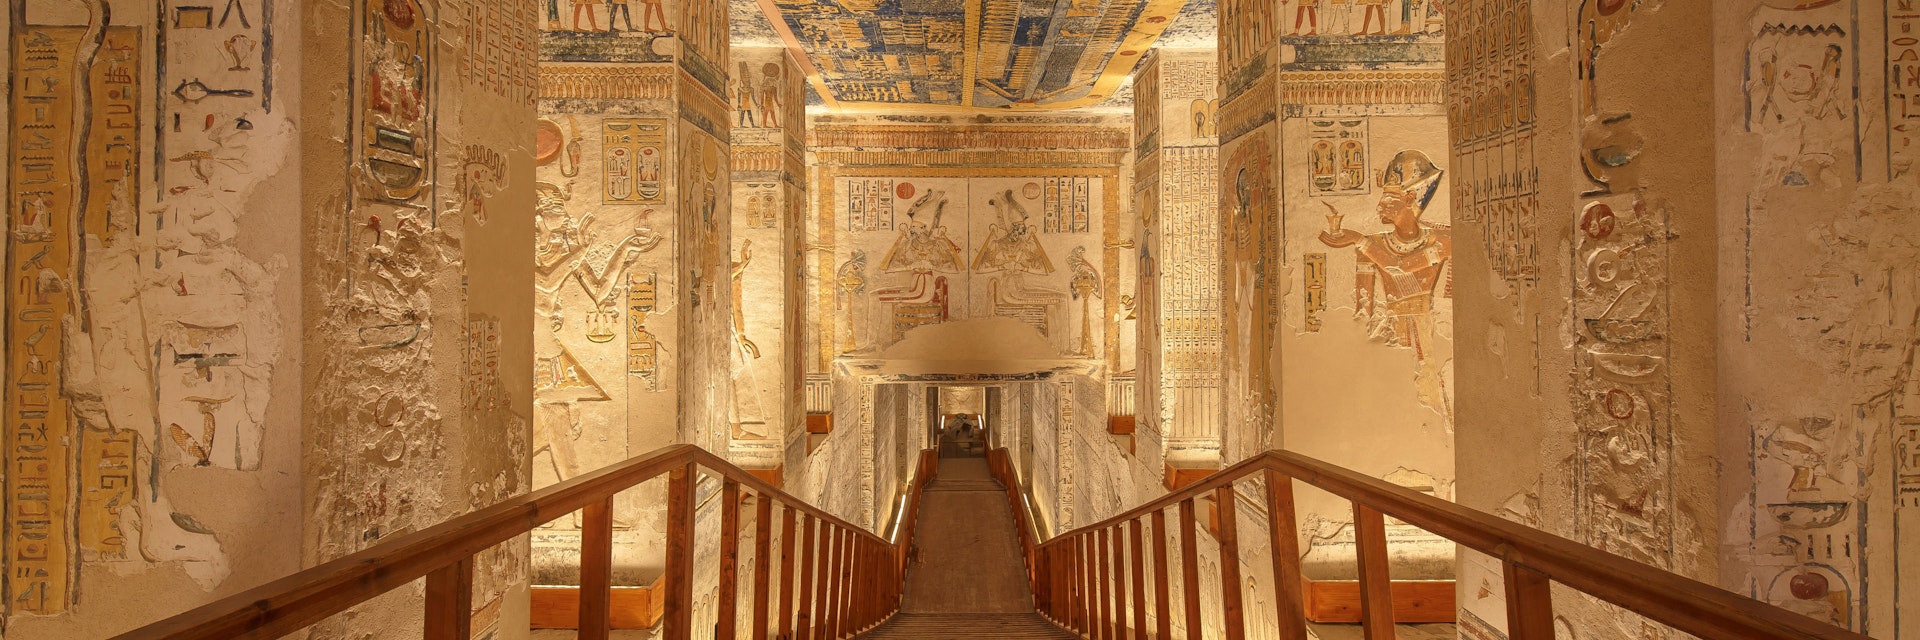 LUXOR, EGYPT - FEBRUARY 5 2016 - Unique shot of the Ramesses VI tomb in Valley of the Kings. Obtaining permission for taking images there is painstaking but worth it.; Shutterstock ID 467883095; Your name (First / Last): Lauren Keith; GL account no.: 65050; Netsuite department name: Online Editorial; Full Product or Project name including edition: Southern Egypt temples article
africa, ancient, archaeology, architecture, art, burial, culture, editorial, egypt, egyptian, faraon, great, heritage, hieroglyph, history, interior, kings, luxor, monument, of, pharaoh, ramesses, ramses, stairway, the, tomb, tourist, travel, valley, vi, walkway